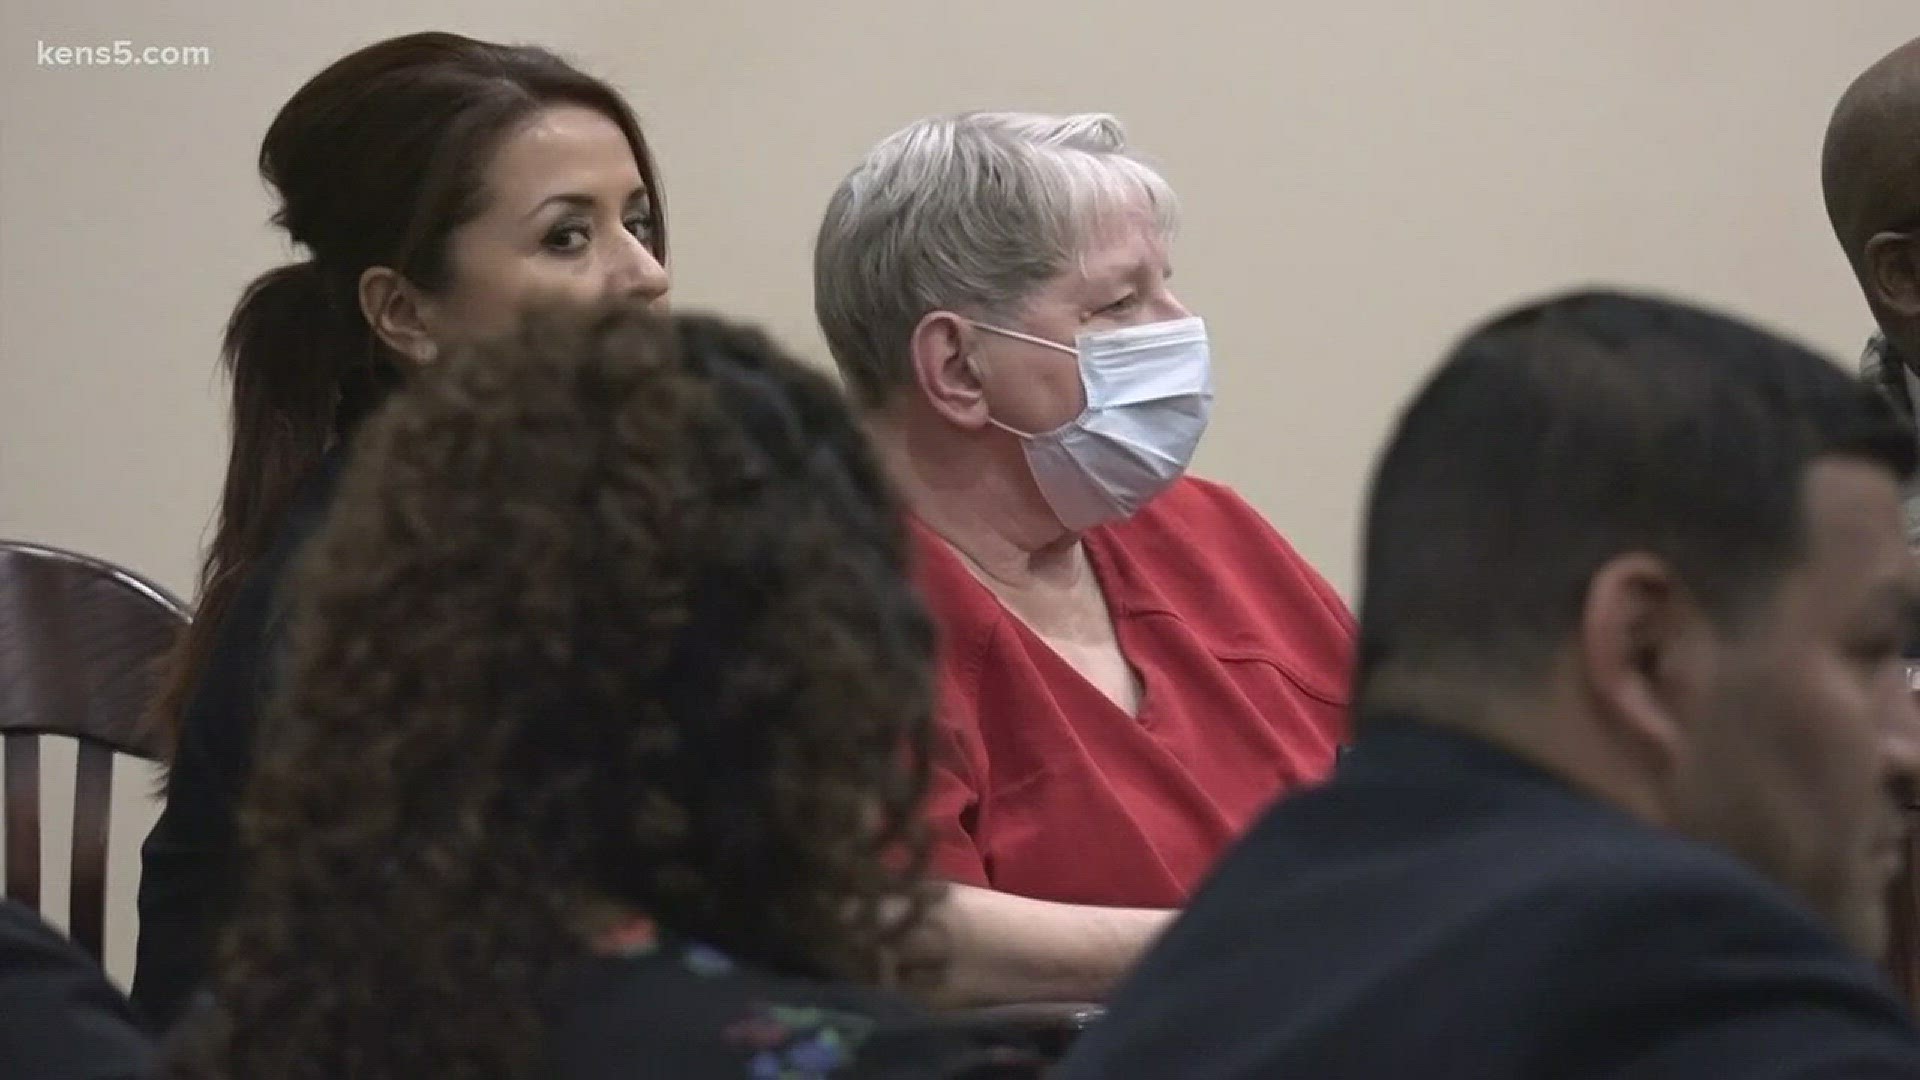 "Killer Nurse" Genene Jones pled not guilty in Bexar County court Thursday morning. She faces five new felony first-degree murder charges.